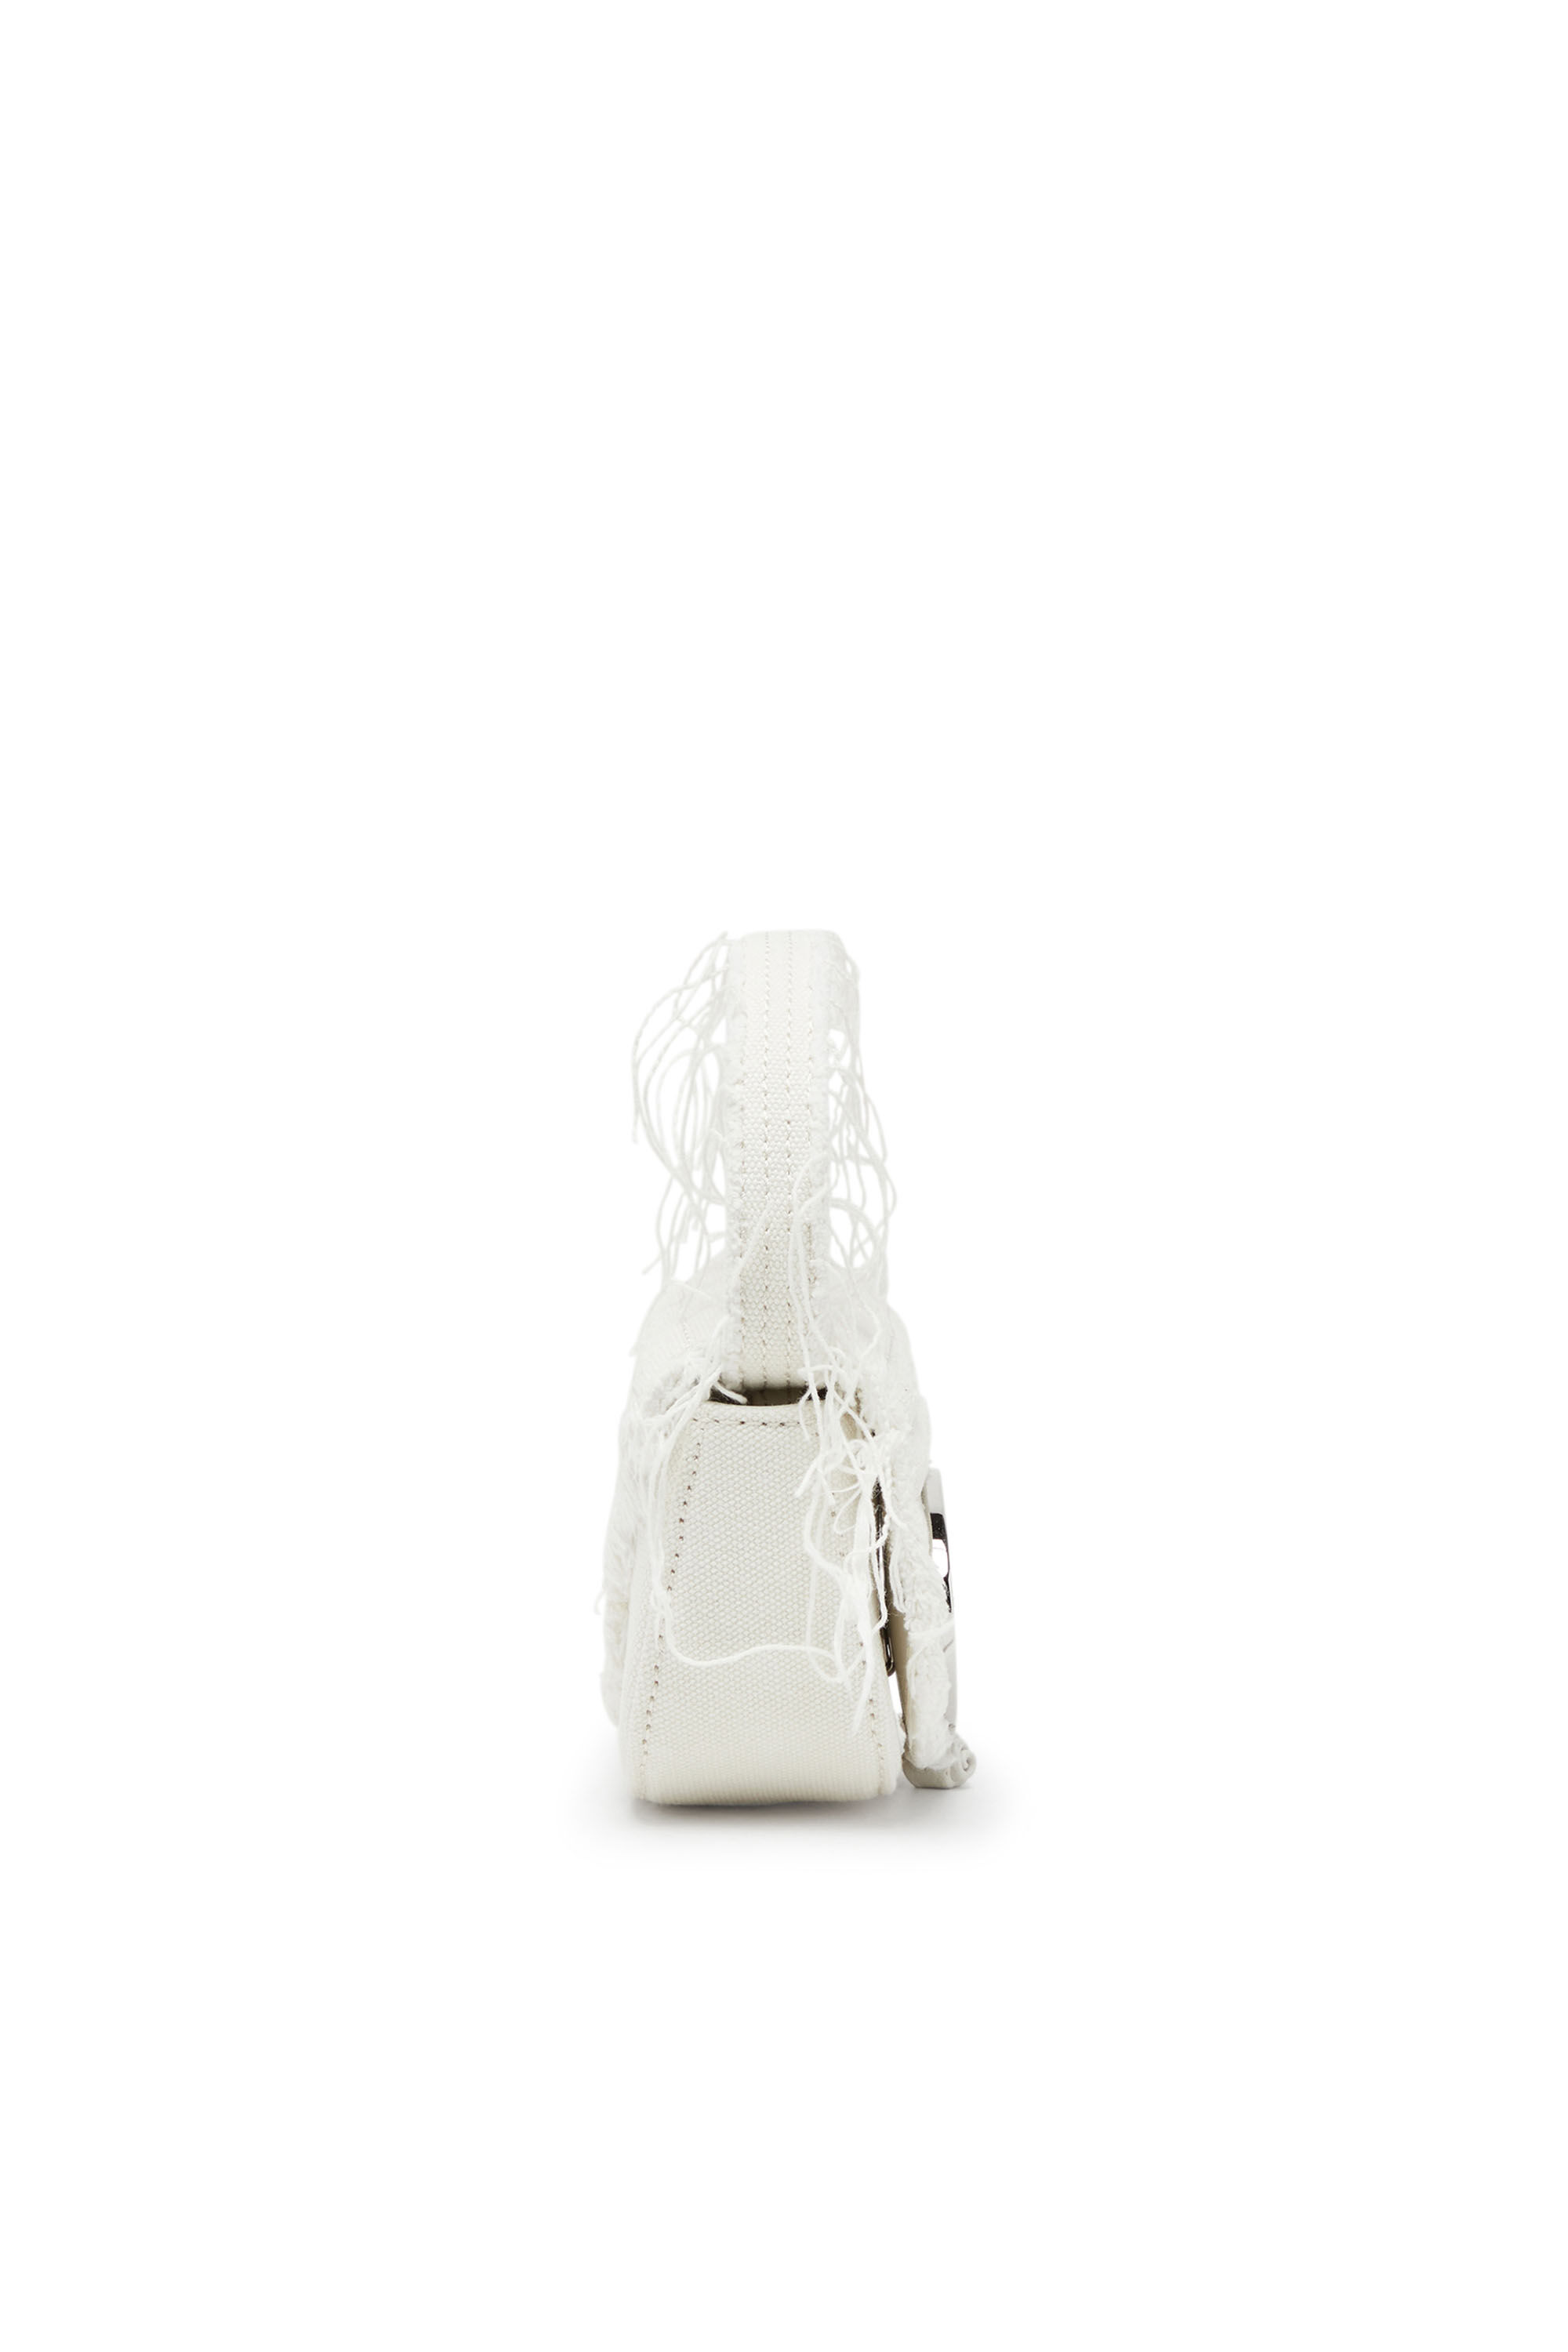 Diesel - 1DR XS, Woman 1DR XS-Iconic mini bag in canvas and leather in White - Image 4